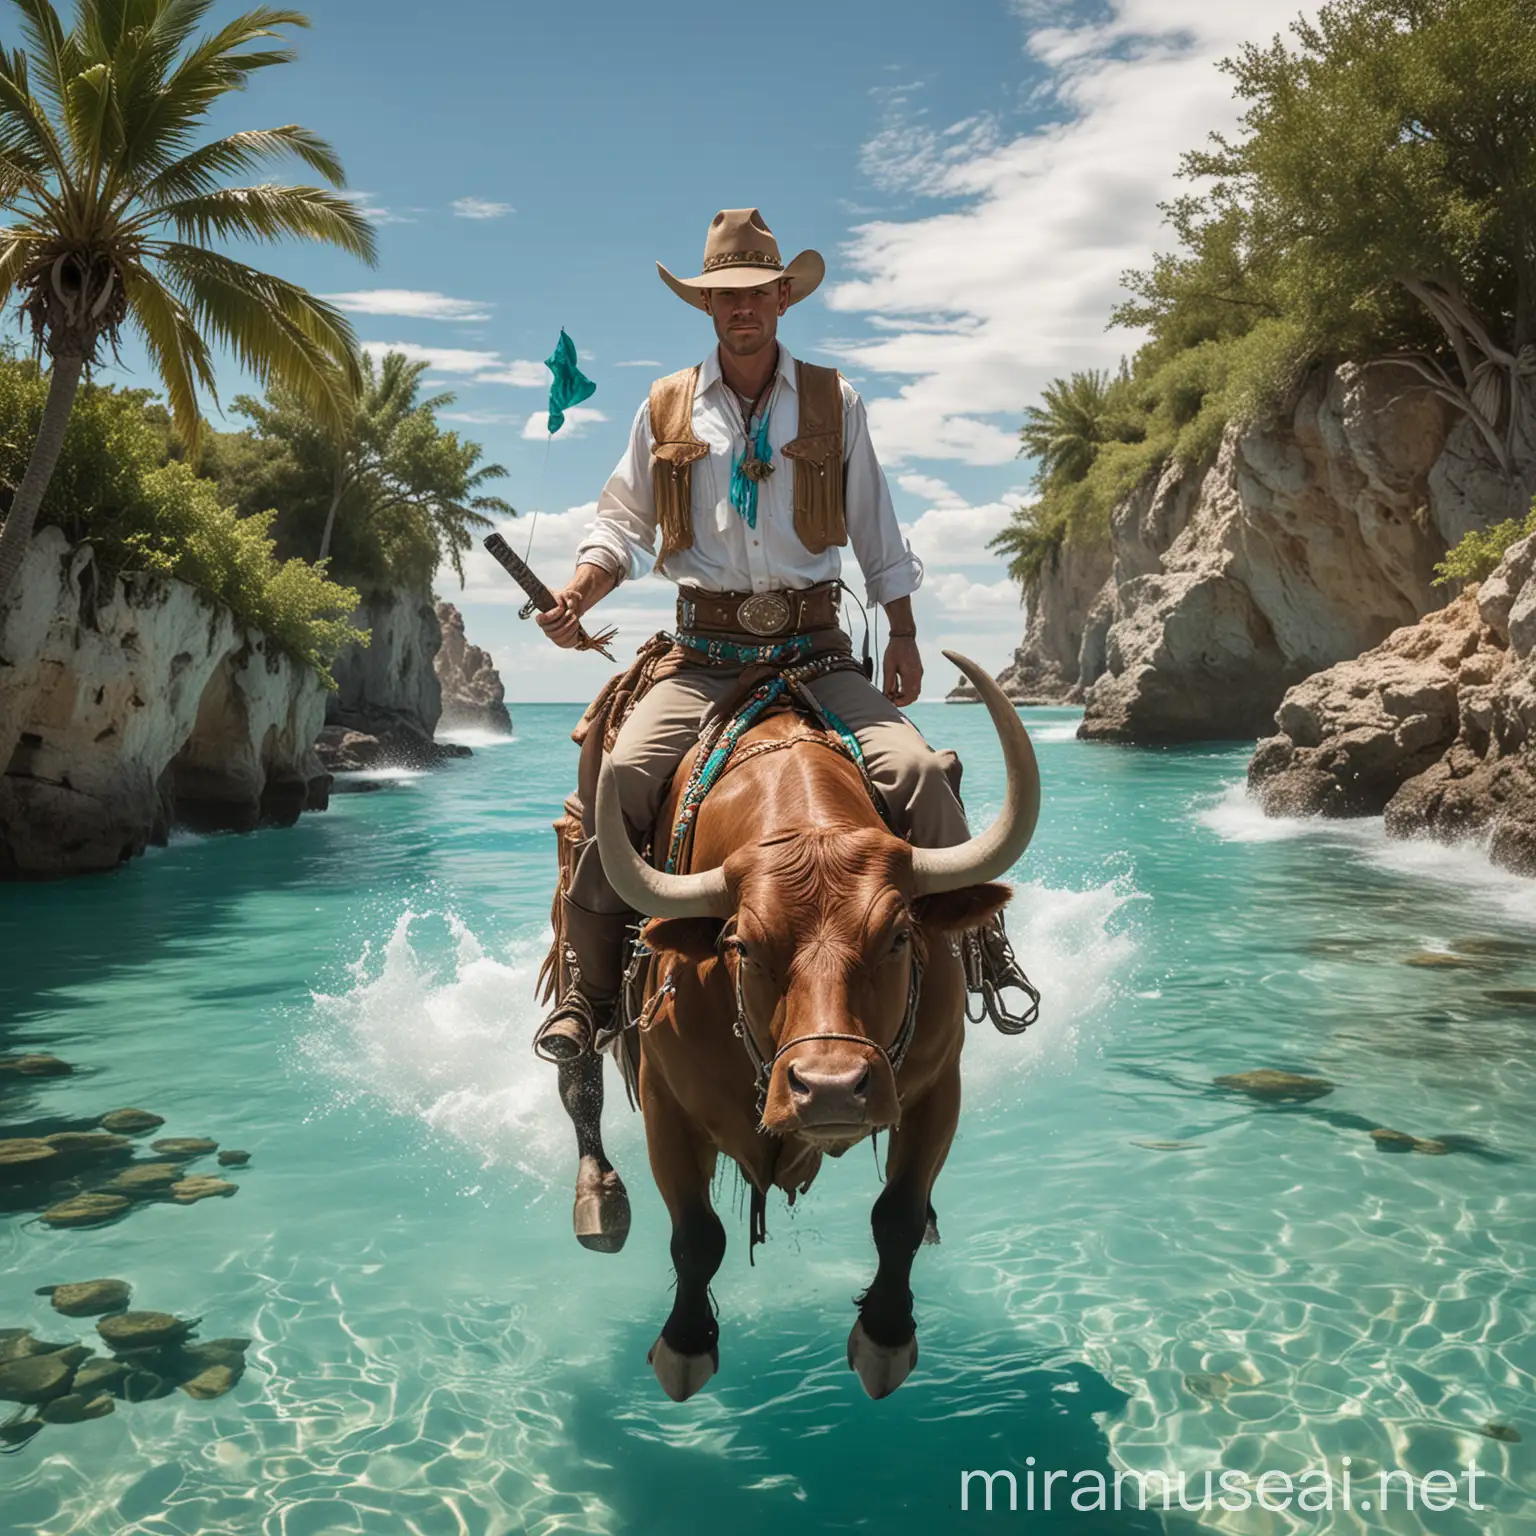 Pioneer Male cowboy Jedi Riding Fearless Bull surrounded by paradise and turquoise waters, dollars signs floating in background